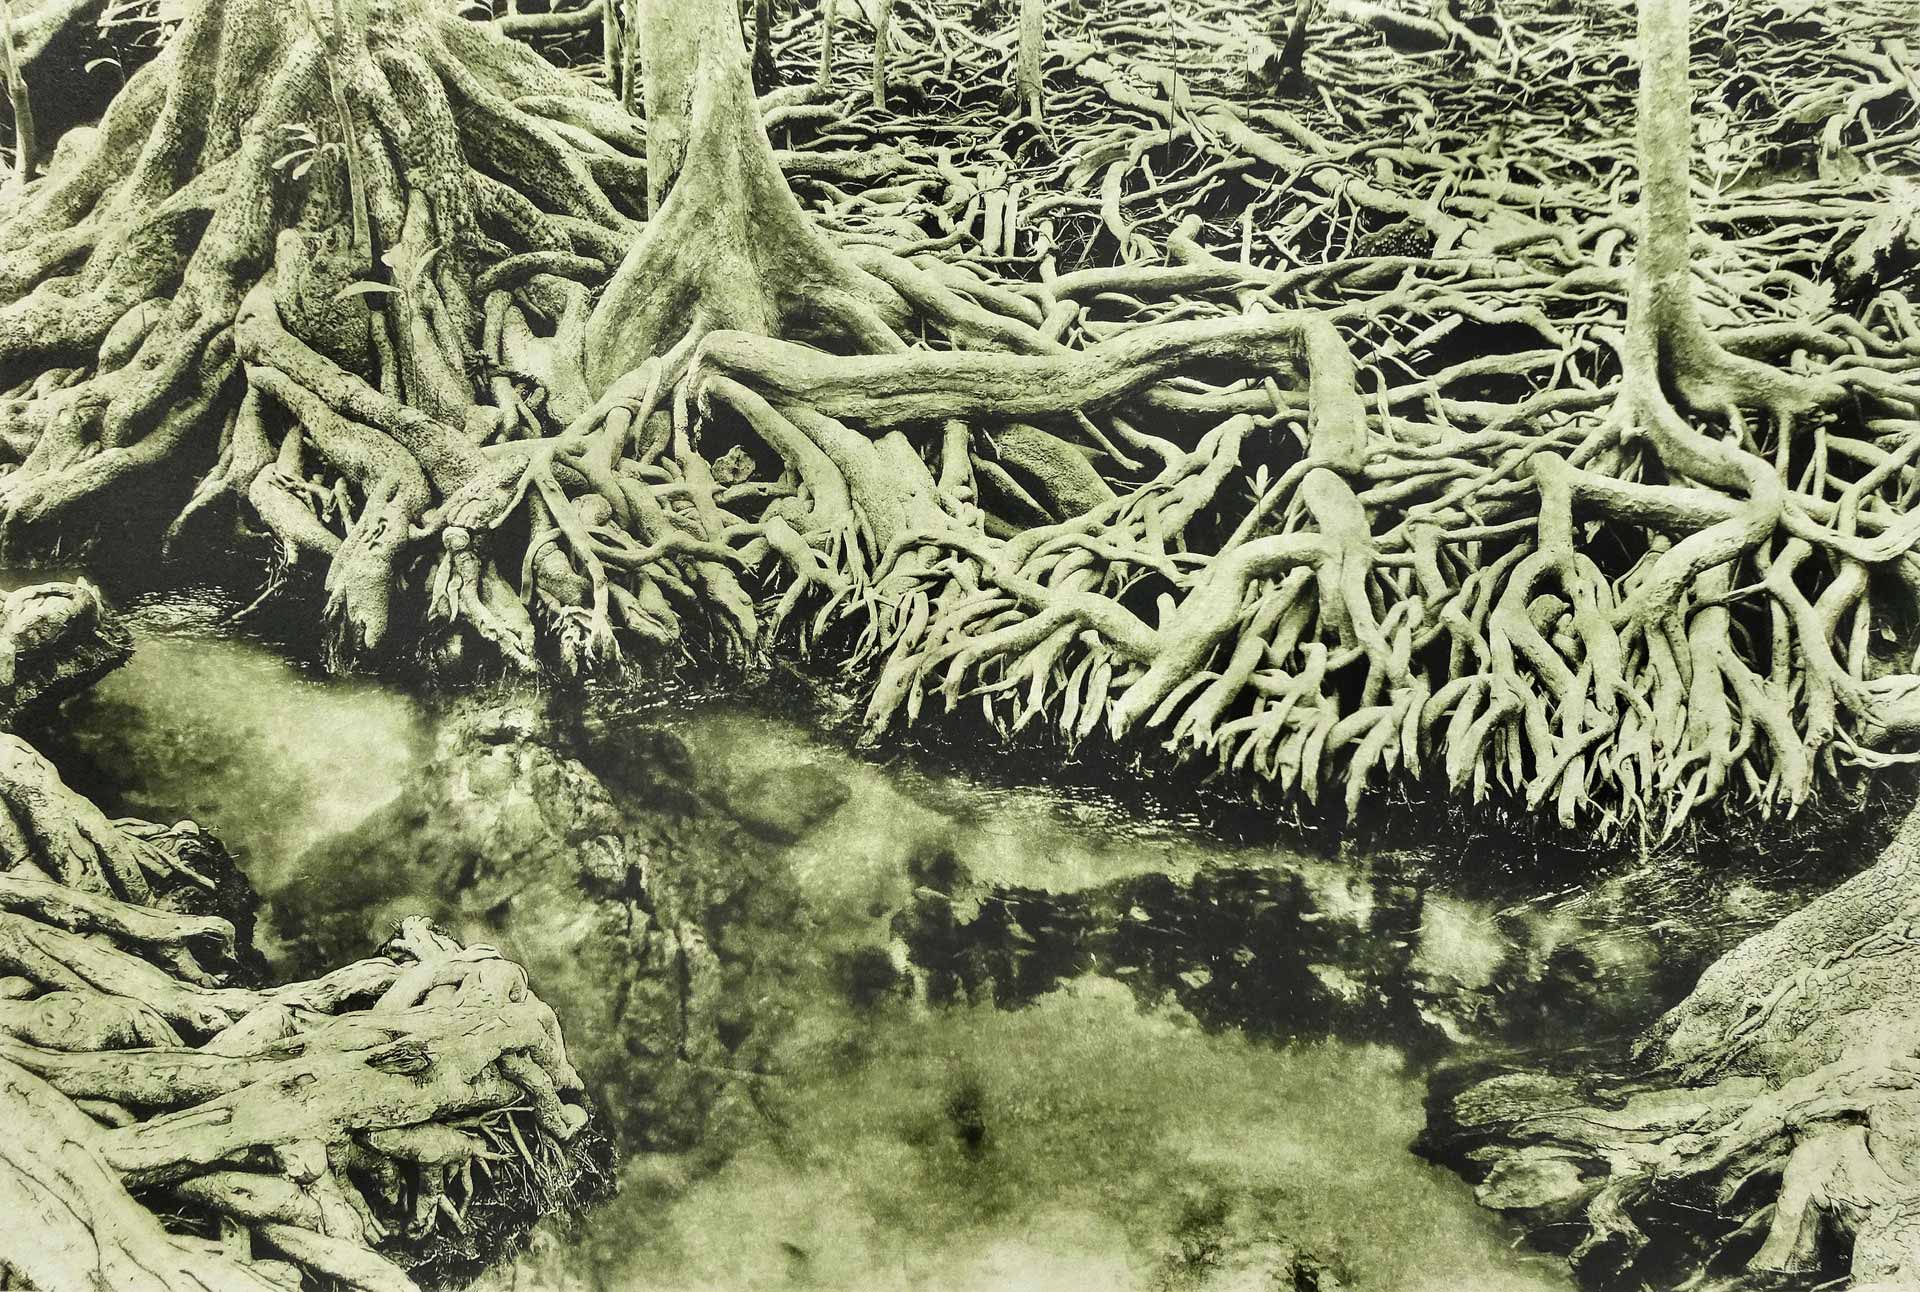 Sonia Mehra Chawla, Scapelands III, 2015, Photopolymer Gravure (etching) on somerset archival paper, 300 GSM